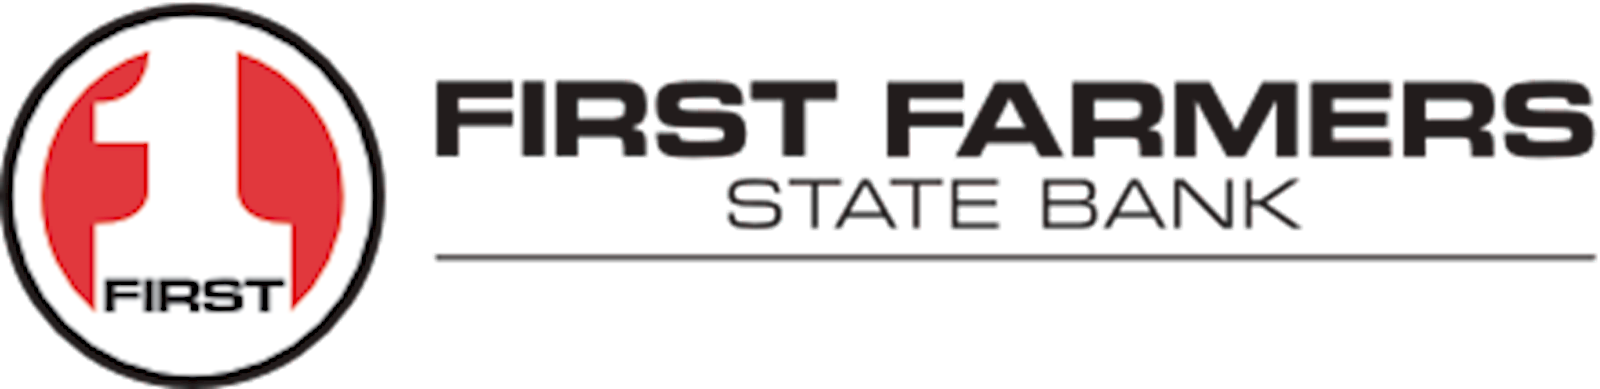 First Farmers State Bank of Minier.png